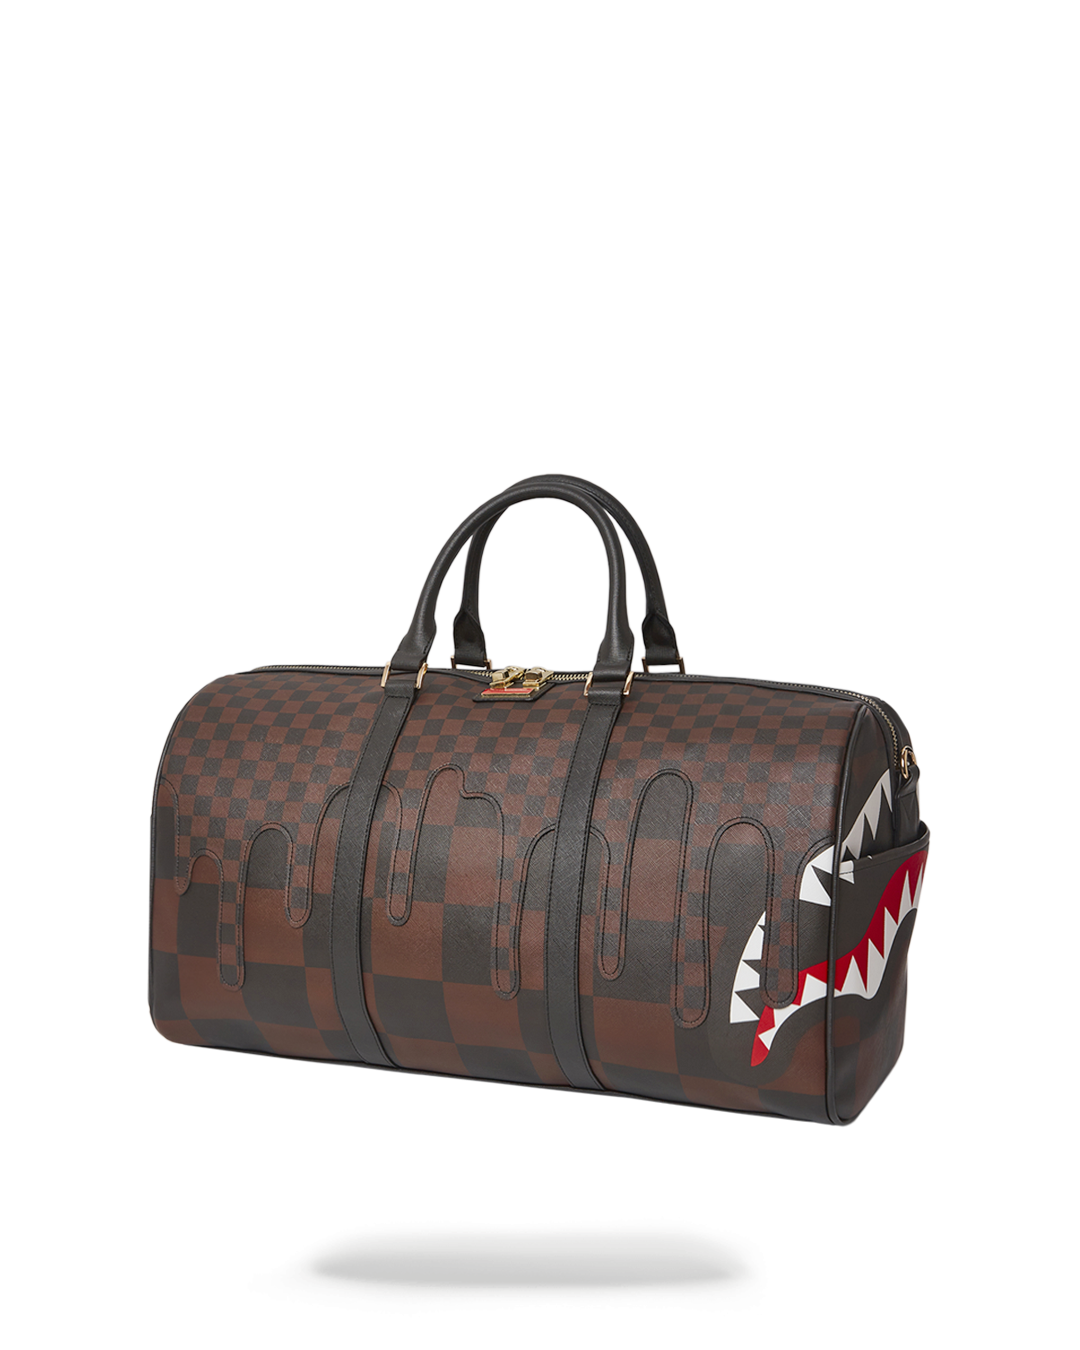 Luggage & Travel bags Sprayground - Sharks in Paris Limited Edition duffle  bag - 910D3277NSZ